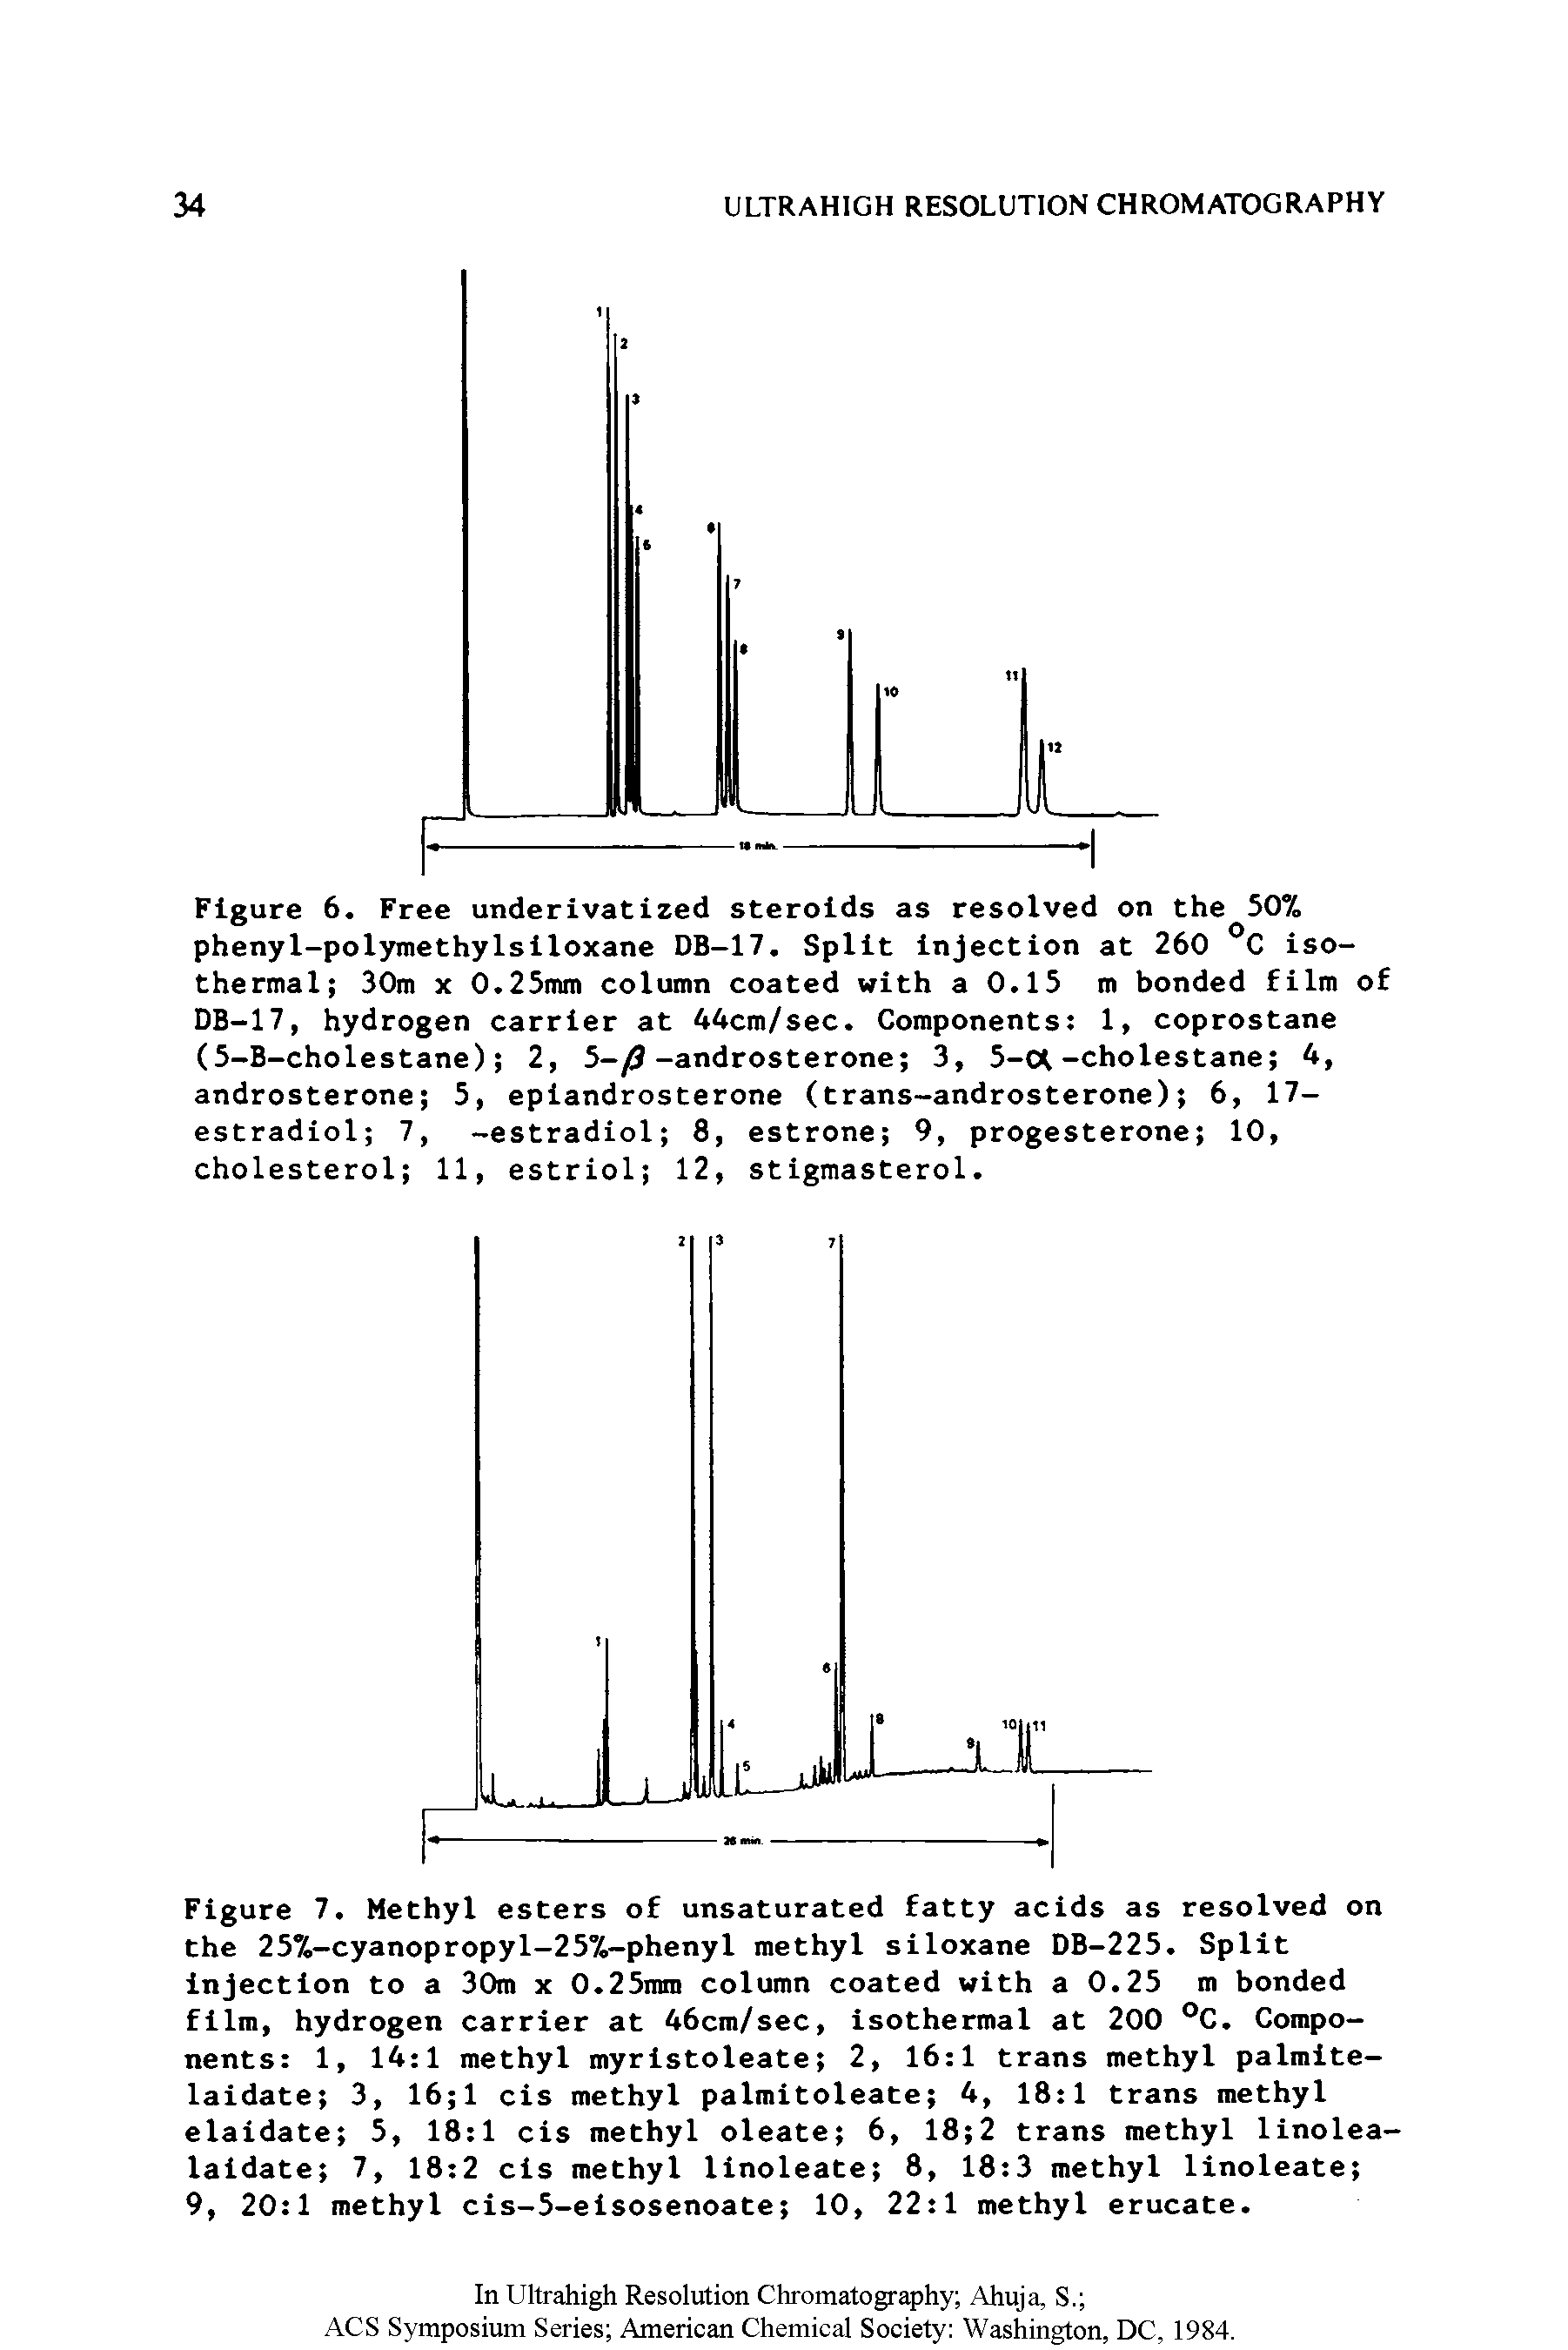 Figure 6. Free underivacized steroids as resolved on the 50% phenyl-polymethylslloxane DB-17. Split injection at 260 isothermal 30m X 0.2Smm column coated with a 0.15 m bonded film of DB-17, hydrogen carrier at 44cm/sec. Components 1, coprostane (5-B-cholestane) 2, 5-y5-androsterone 3, 5-01-cholestane 4, androsterone 5, eplandrosterone (trans-androsterone) 6, 17-estradiol 7, -estradiol 8, estrone 9, progesterone 10, cholesterol 11, estriol 12, stigmasterol.